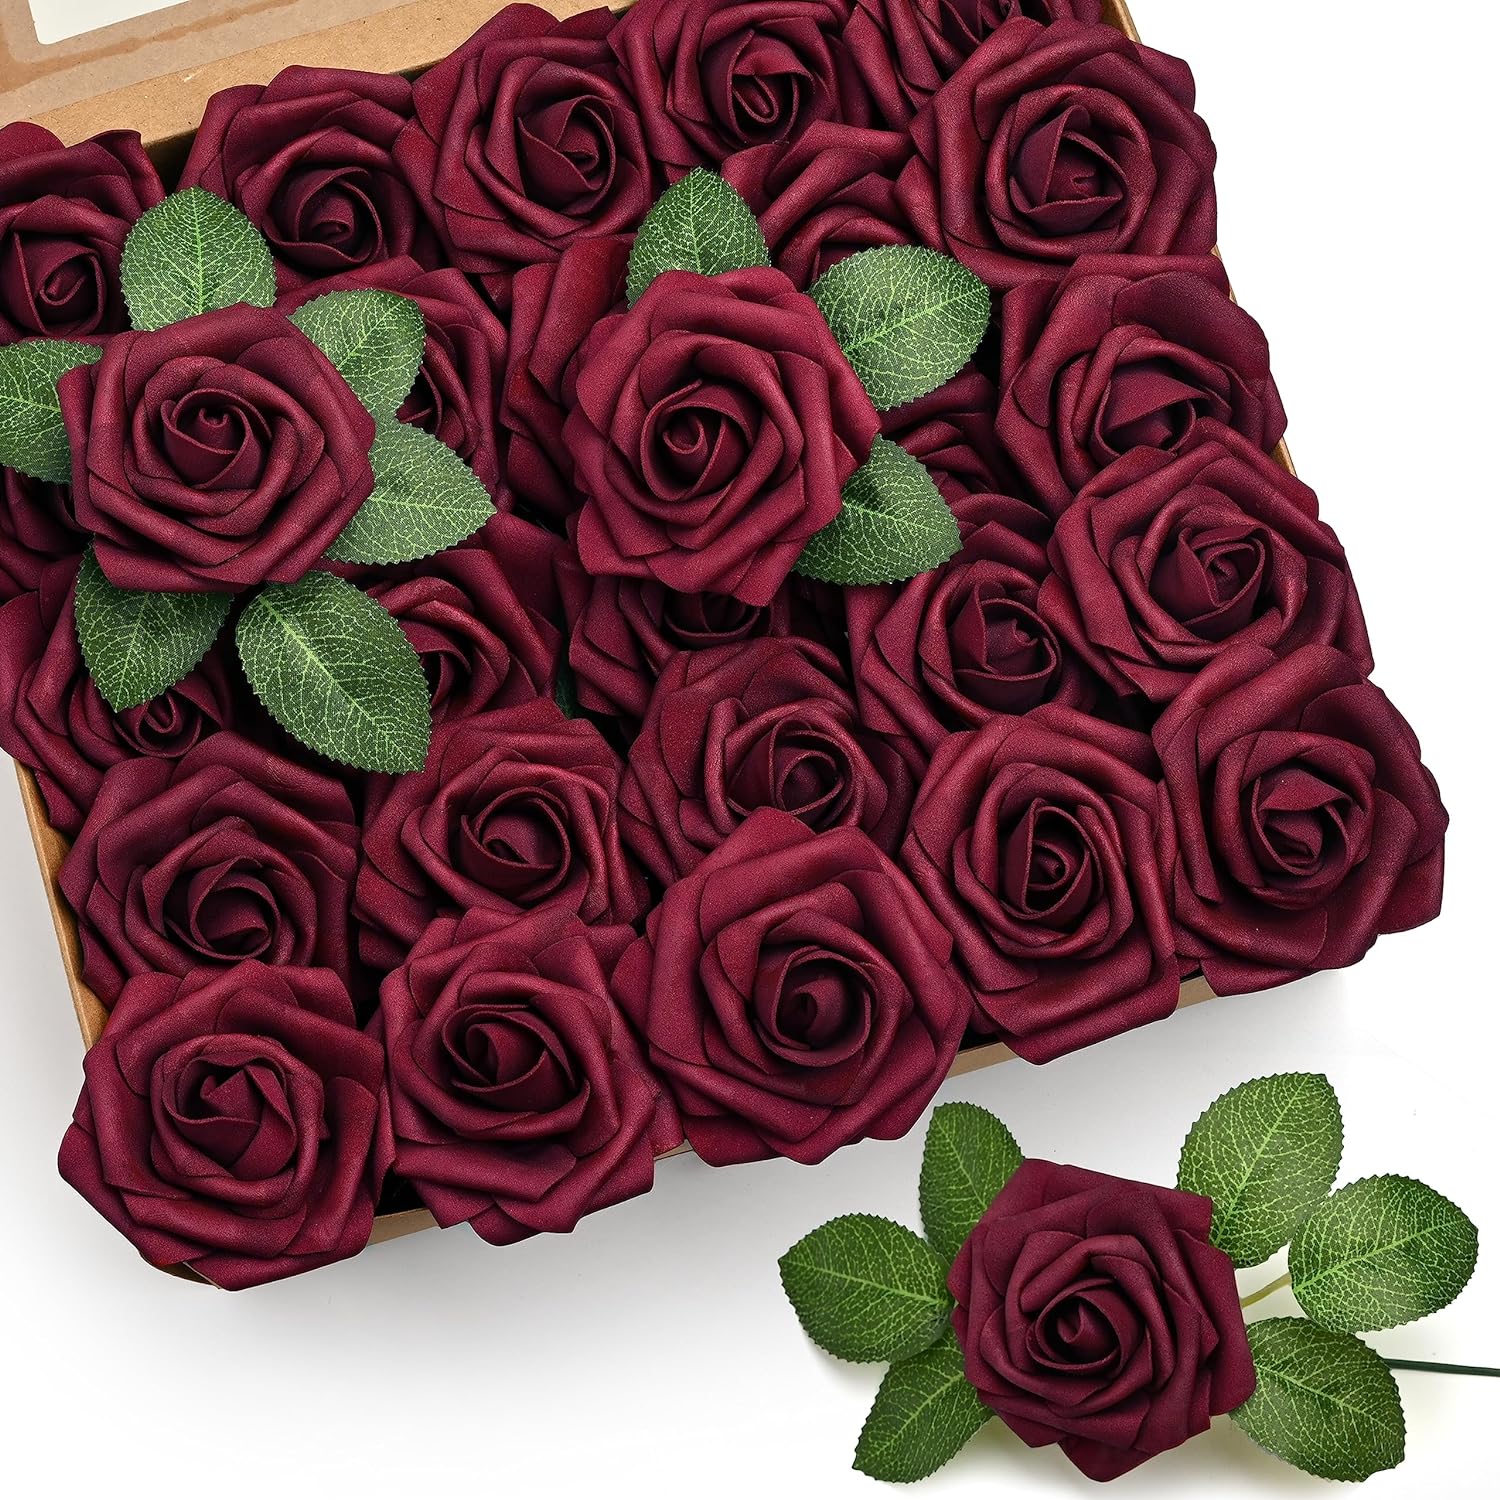 Great Choice Products 50Pcs Artificial Flowers Rose, Burgundy Fake Roses For Decorations, Real Touch Foam Rose Bulk With Stems For Diy Wedding Bouq…